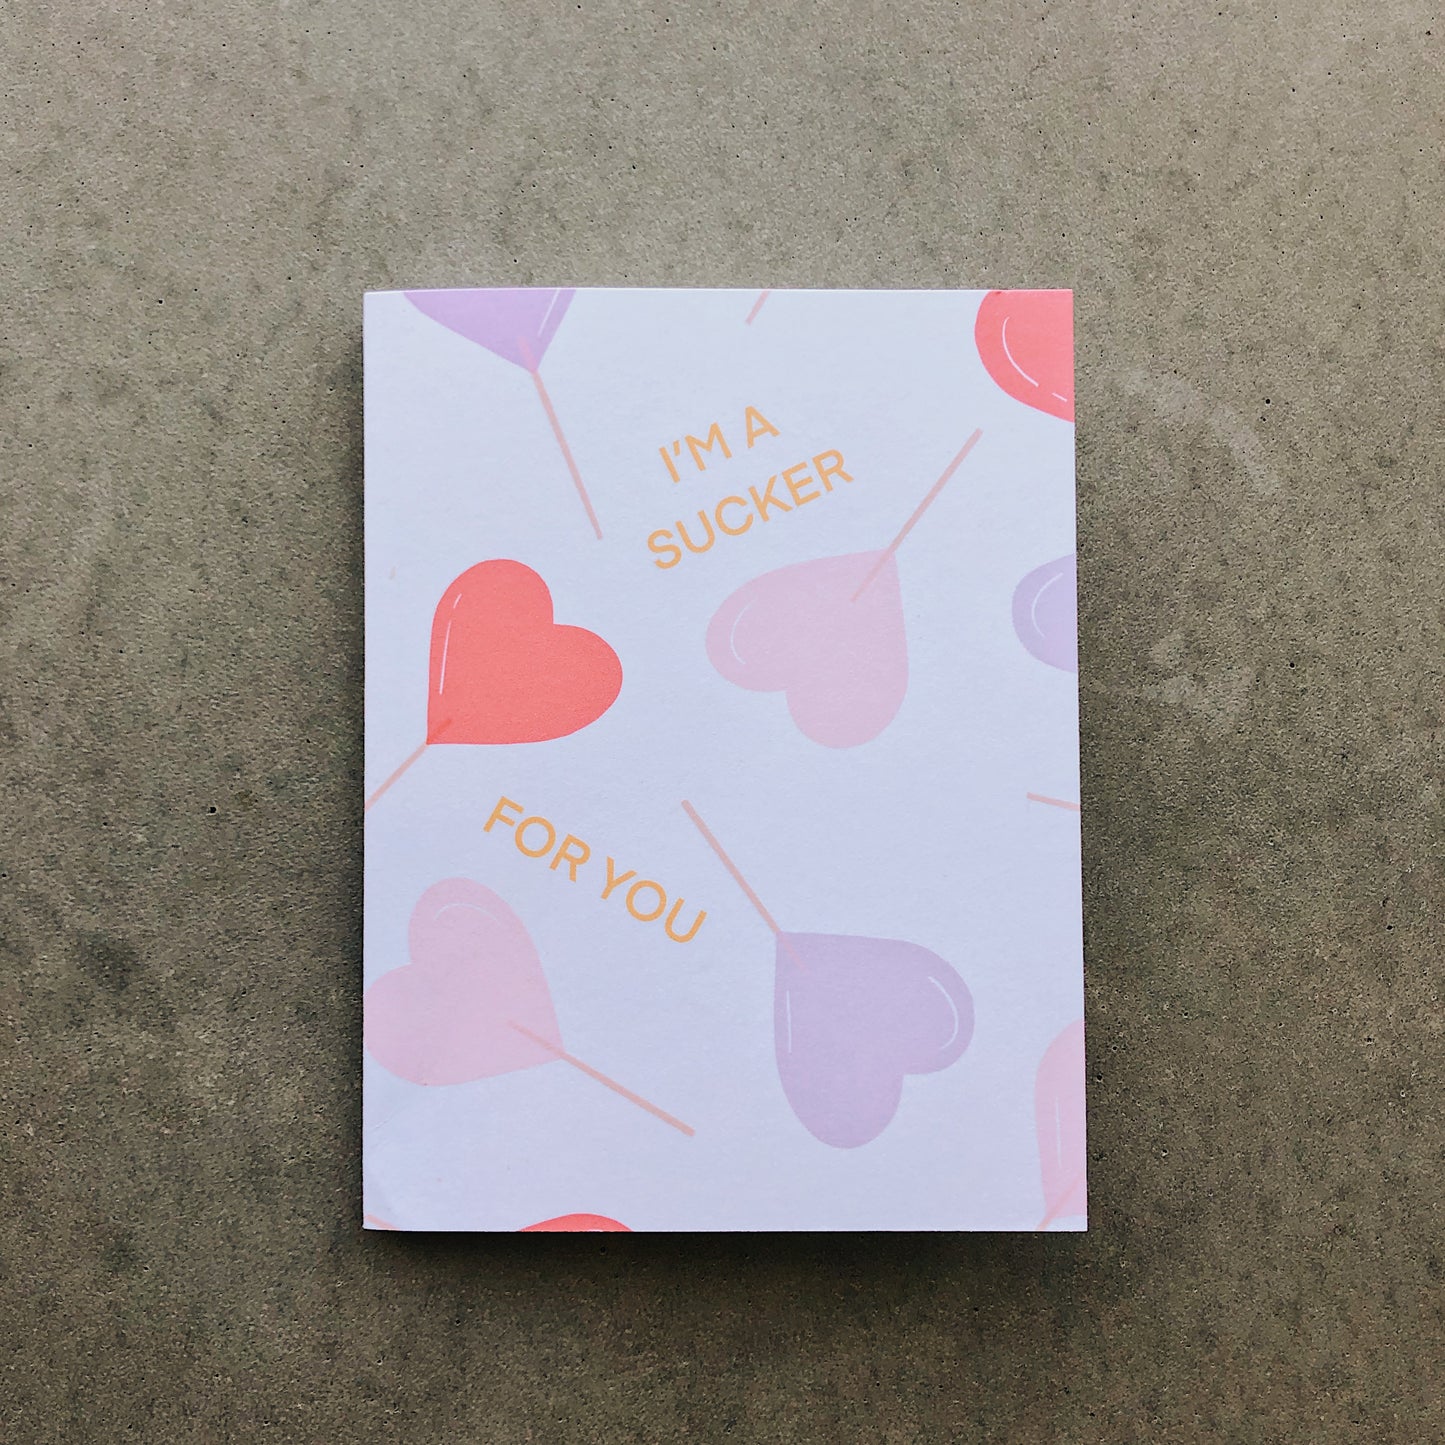 Sucker for you card